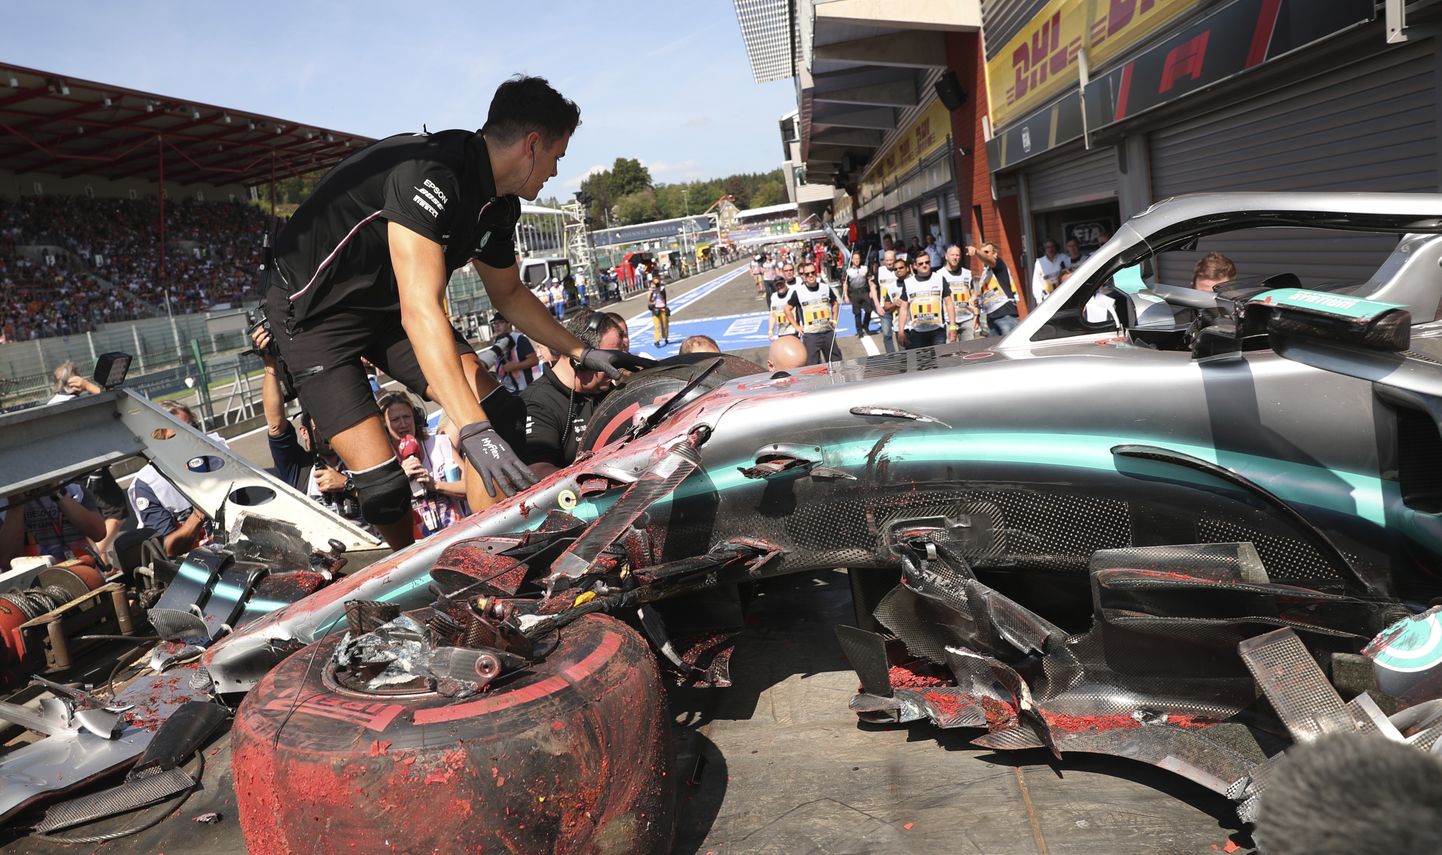 Pit crew inspect the damaged car of Mercedes driver Lewis Hamilton of Britain after Hamilton hit a barrier during the third practice session ahead of the Belgian Formula One at Spa-Francorchamps, Belgium, Saturday, Aug. 31, 2019. The Belgian Formula One race will take place on Sunday. (AP Photo/Francisco Seco)